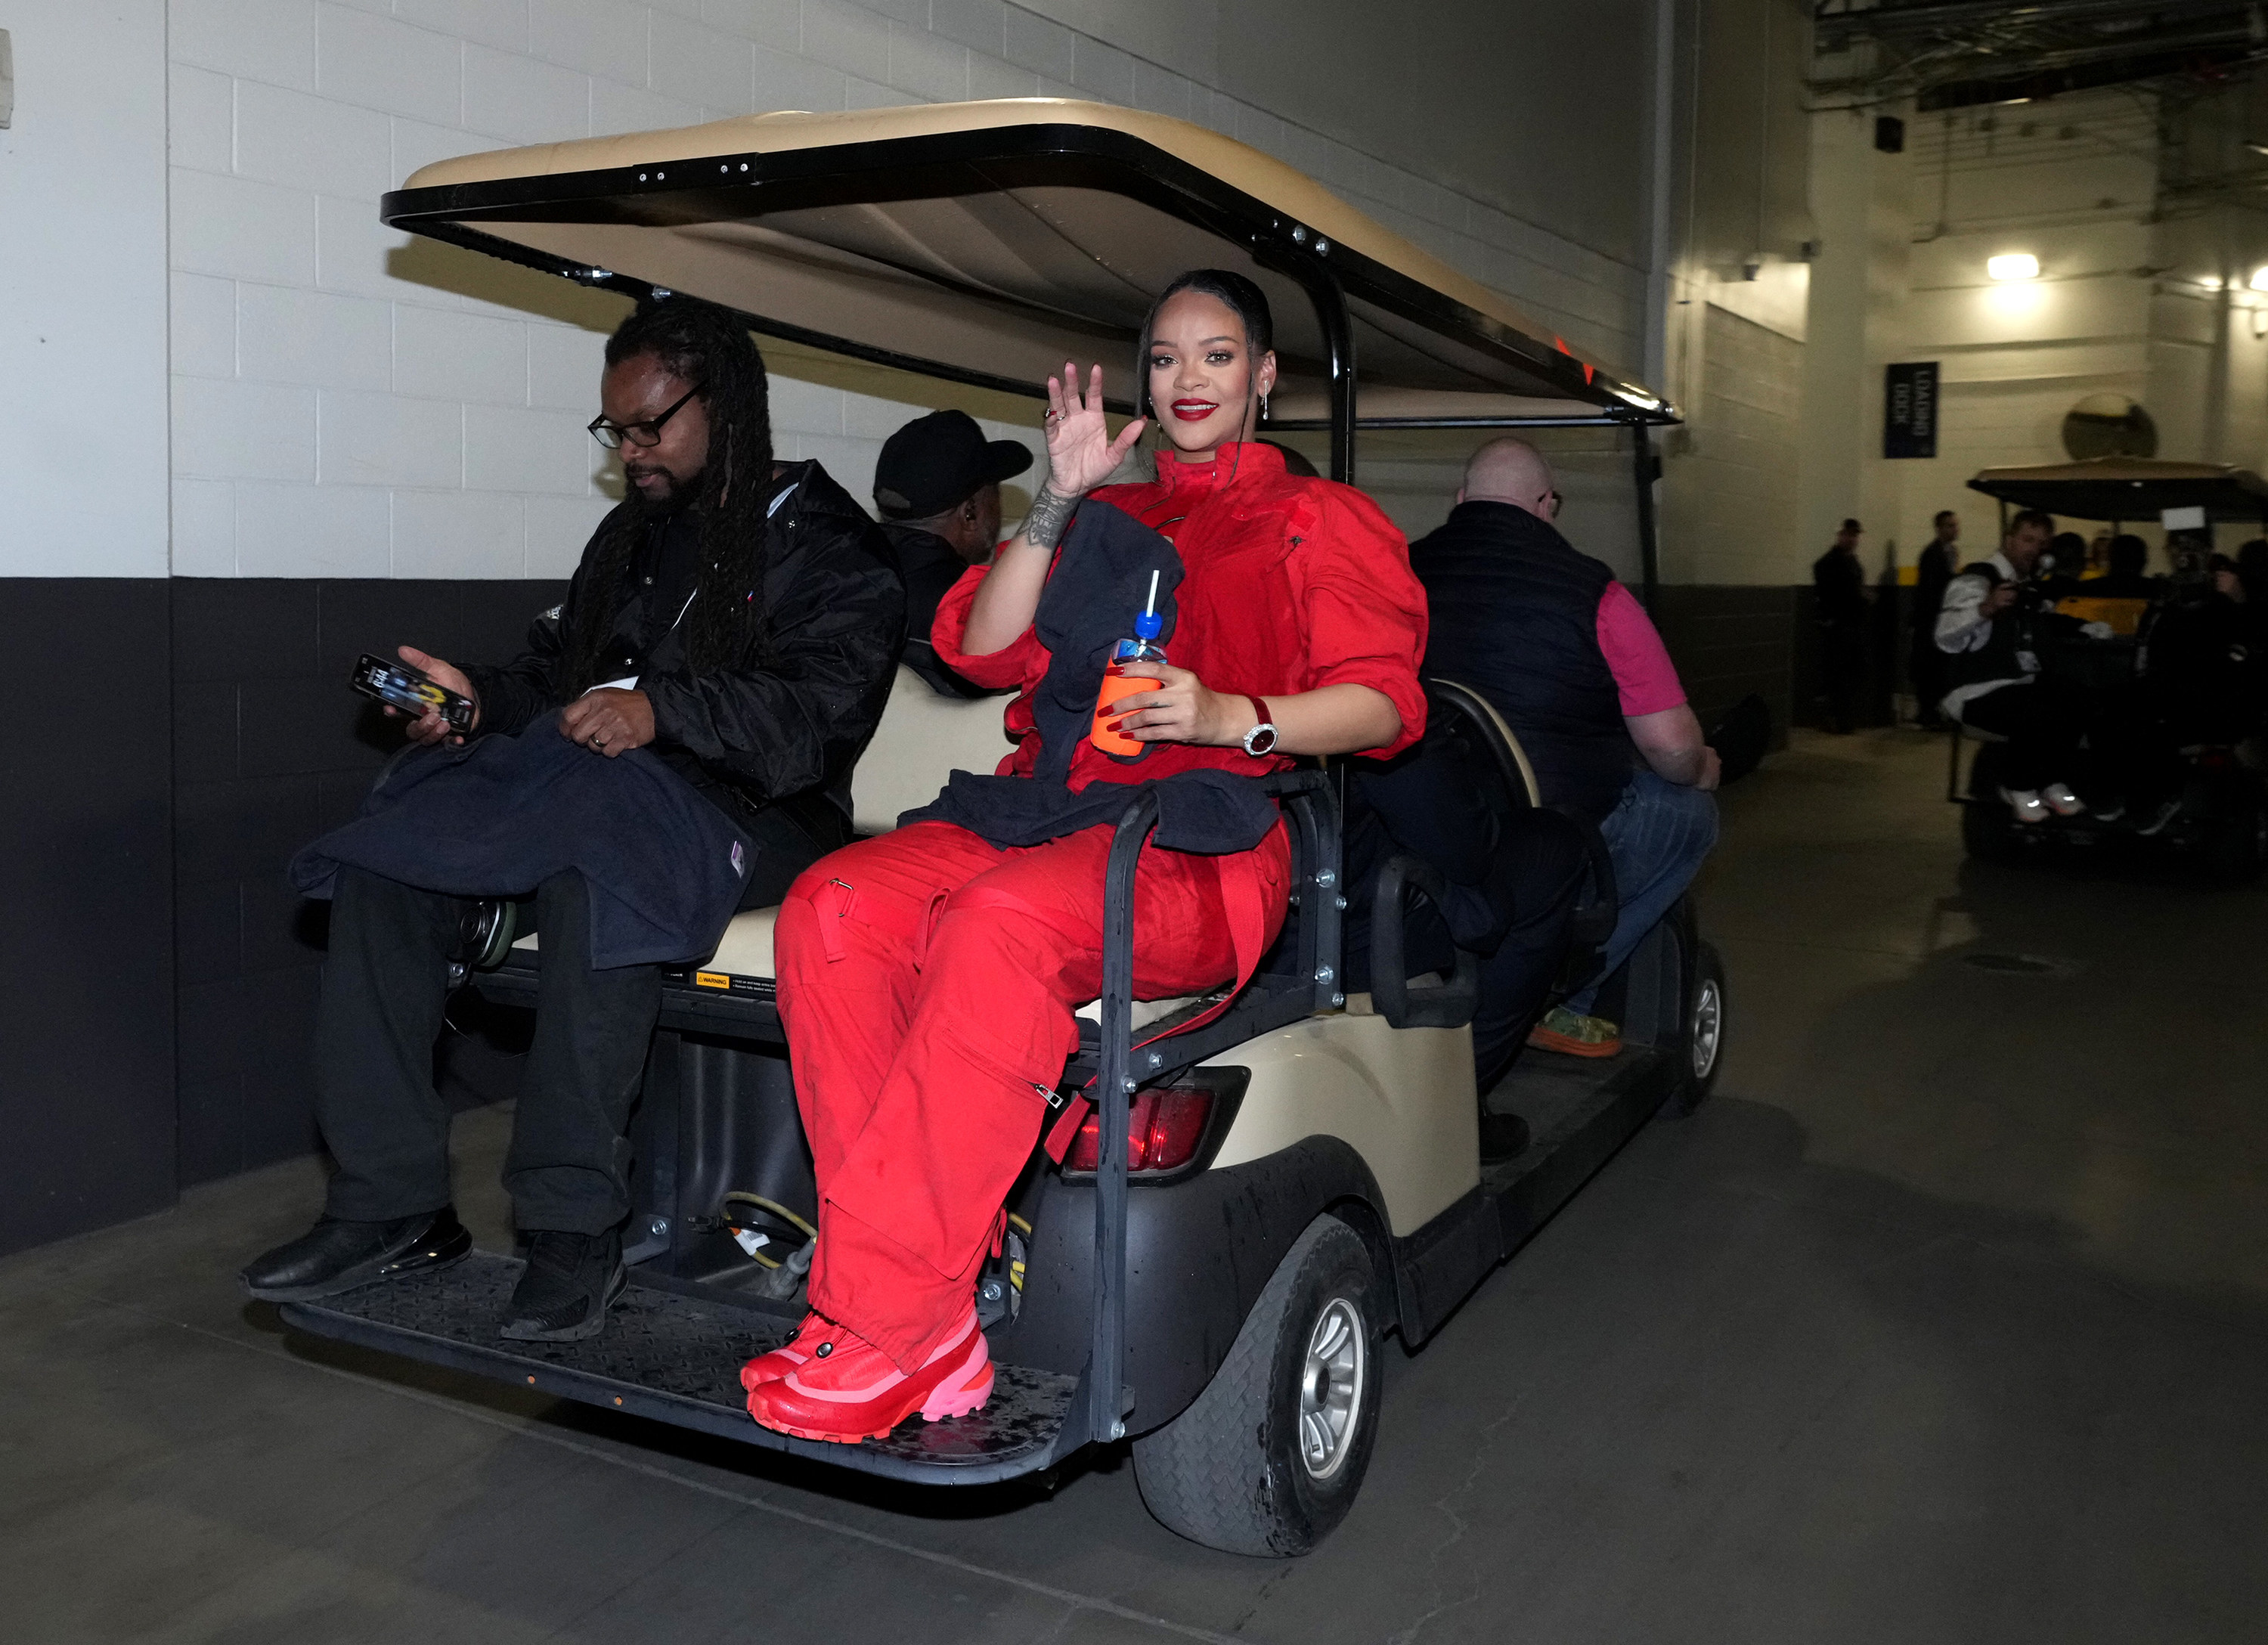 Rihanna waving from the back of a golf cart